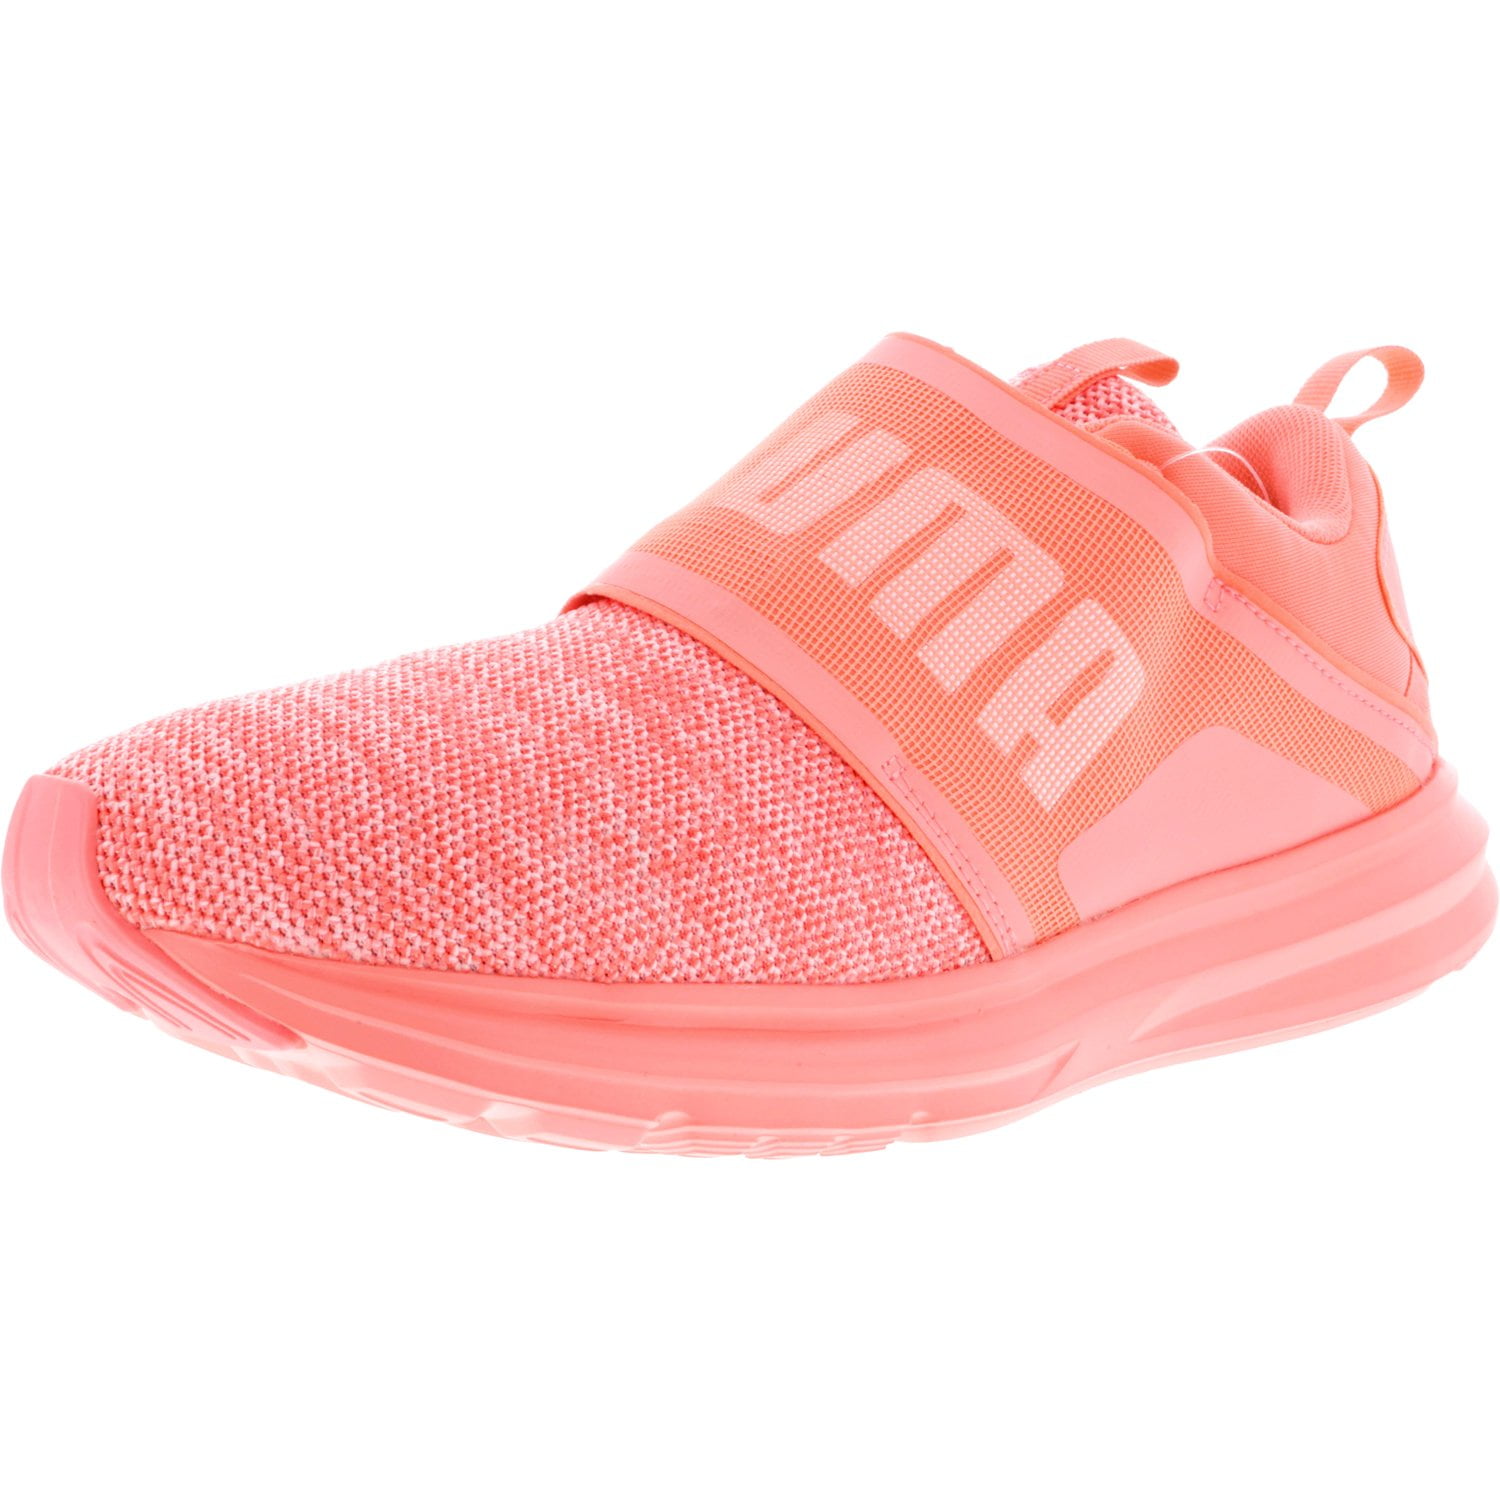 Puma Women's Enzo Strap Knit Nrgy Peach / White Low Top Running Shoe ...